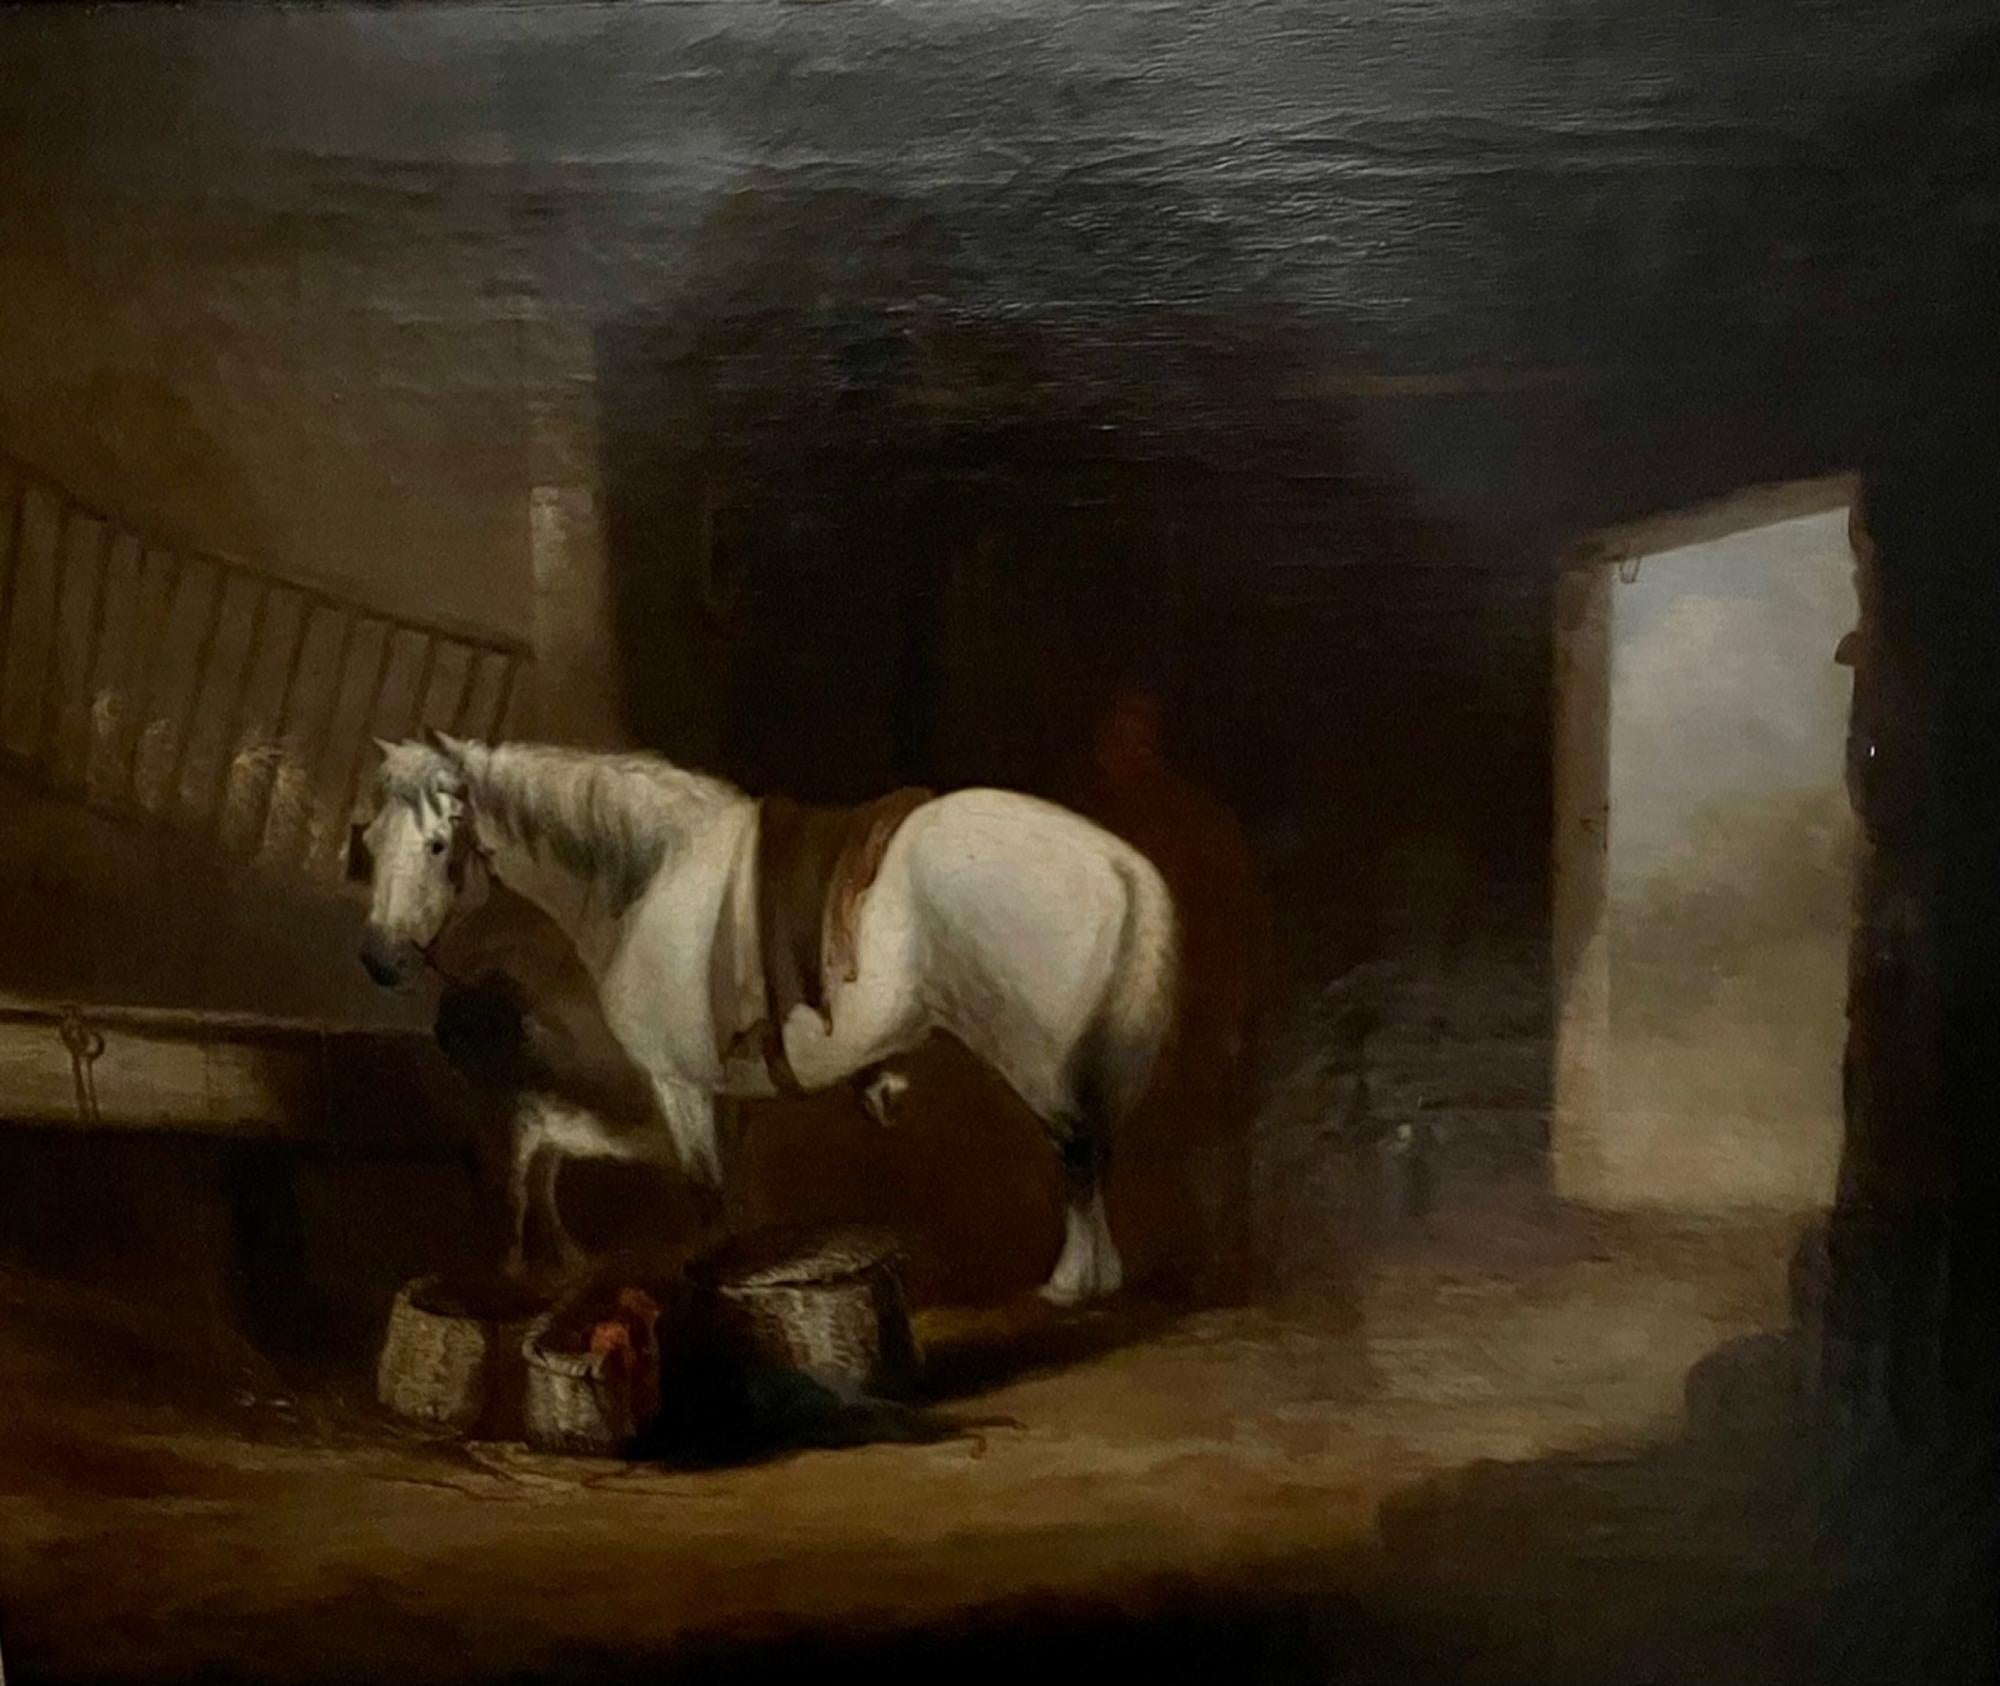 Attributed to William Shayer Snr. (1787 – 1879) A Stable interior with a horse and donkey by a briar, baskets and panniers on the floor beside them. Oil on Canvas. This painting was part of Dauntsey Estate, Wiltshire has never been at auction.
51 x